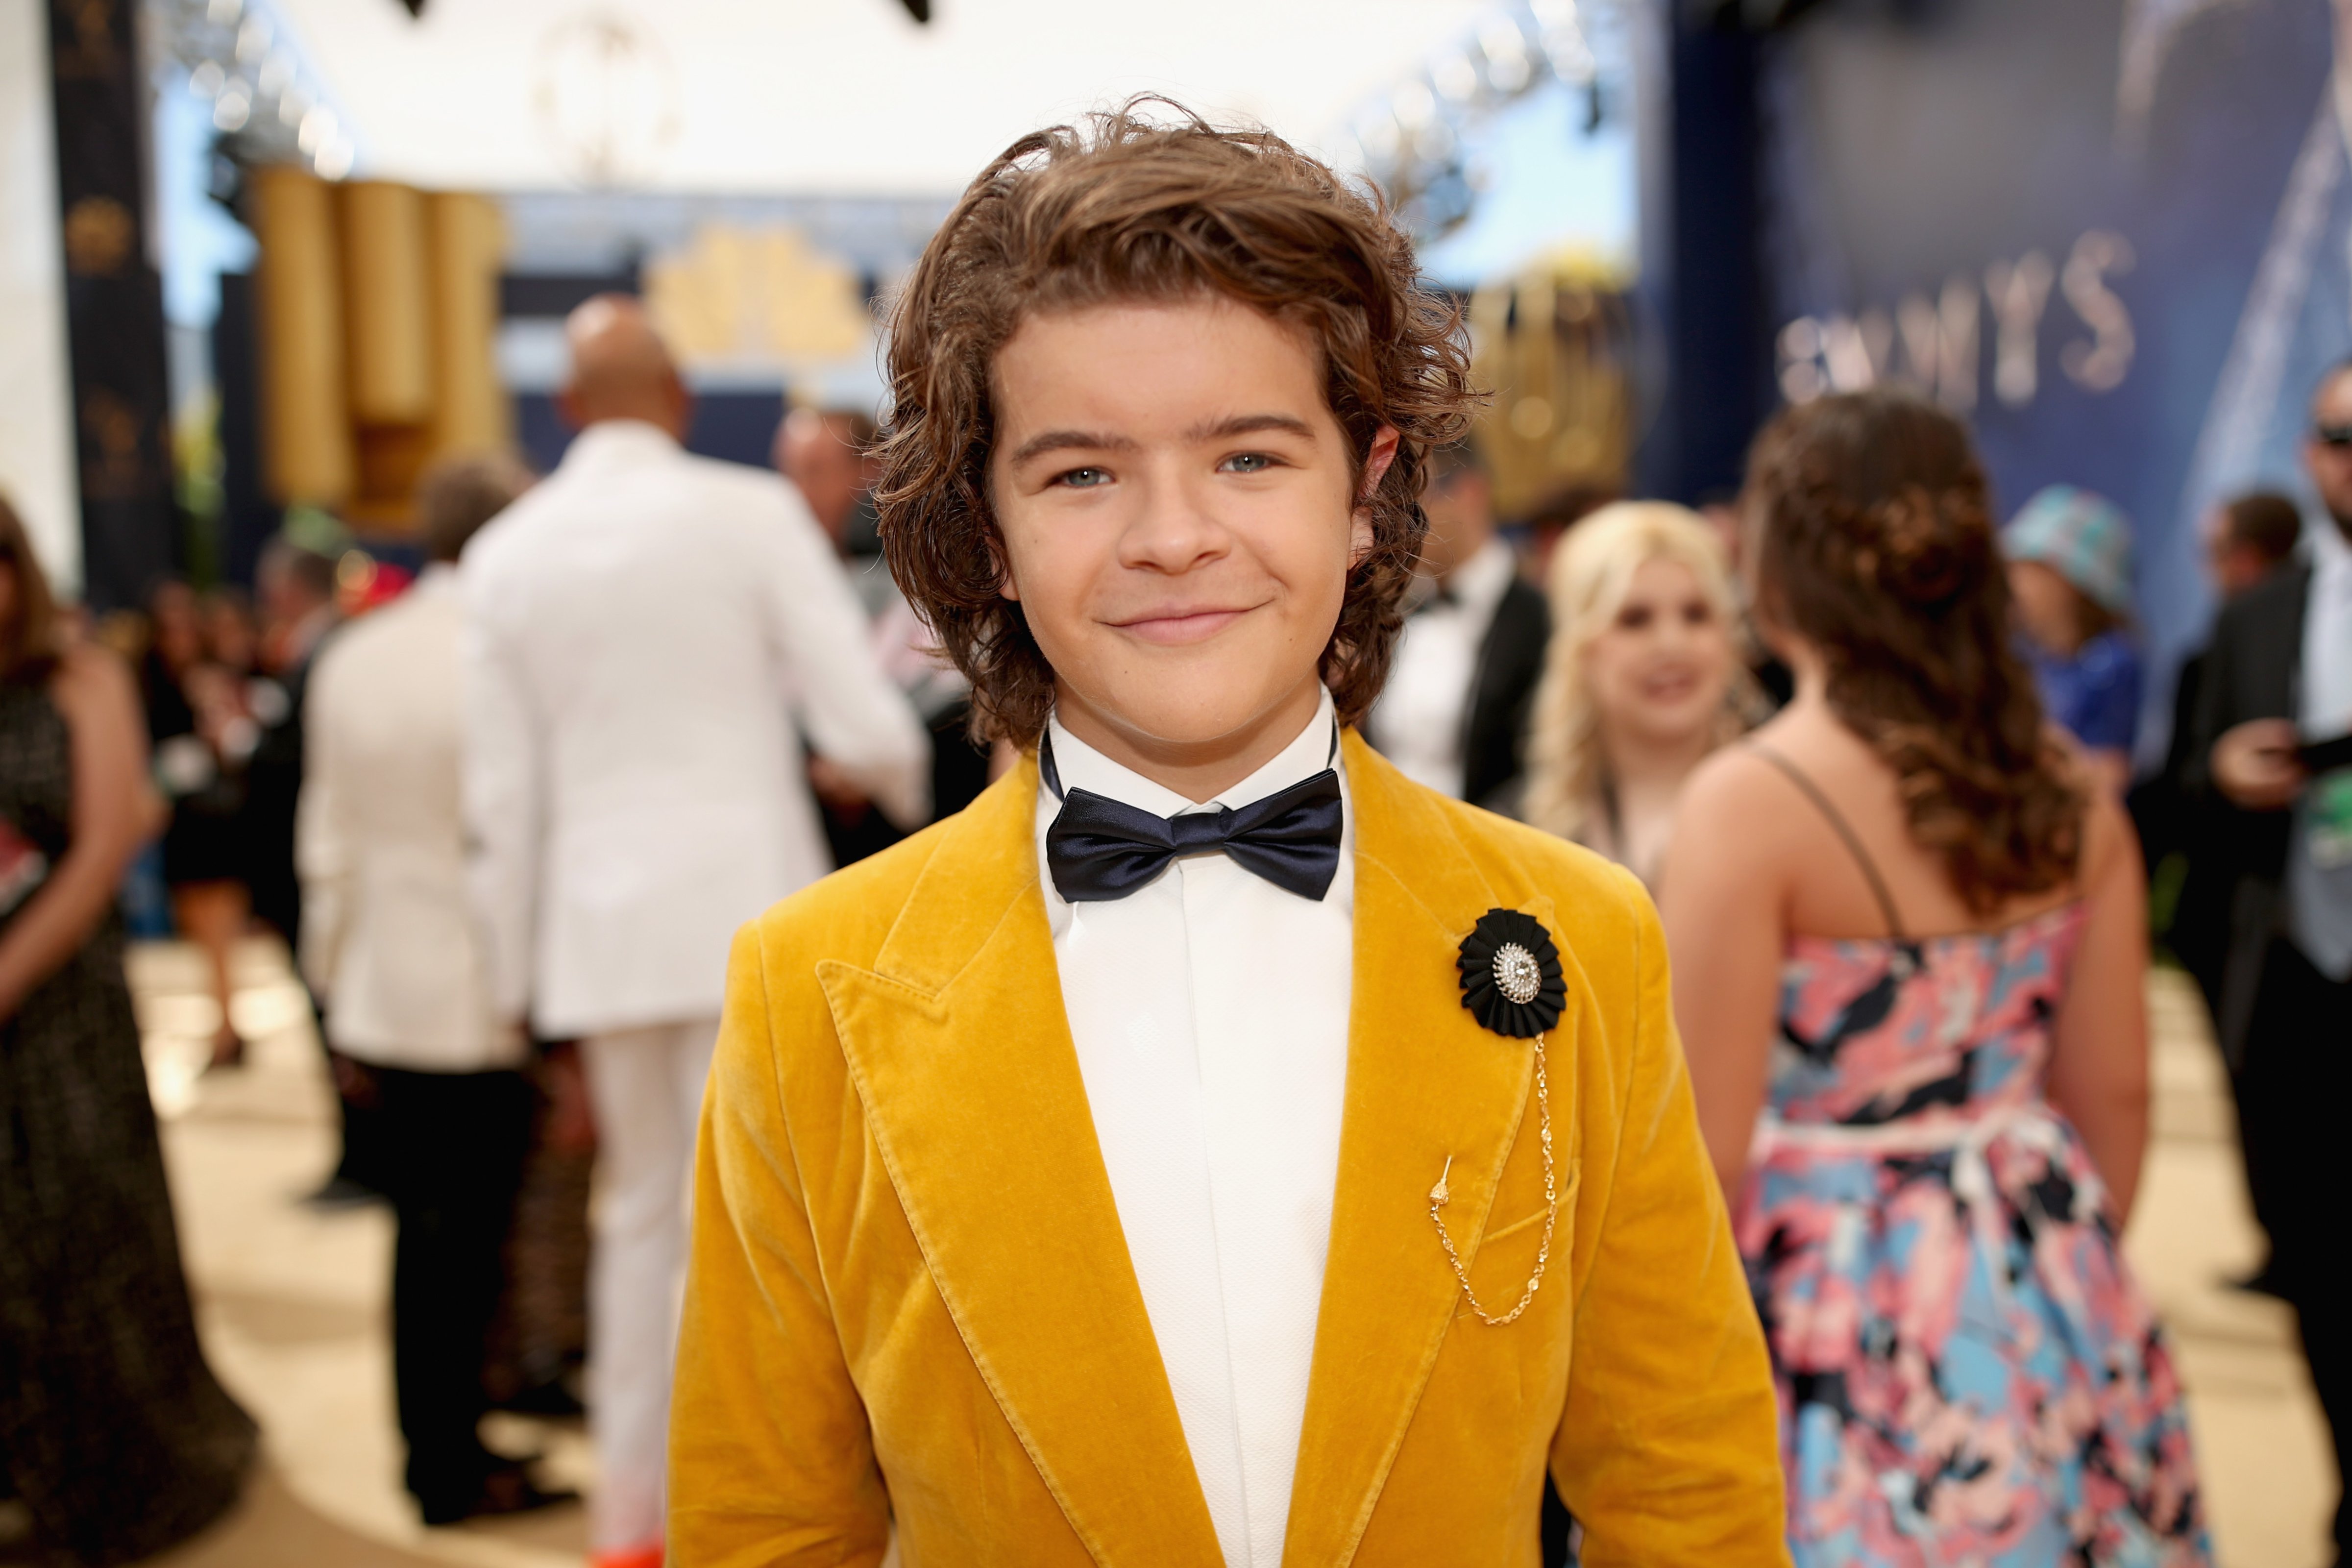 Actor Gaten Matarazzo at the 70th Annual Primetime Emmy Awards on Sept. 17, 2018. (Christopher Polk - NBCU Photo Bank/Getty Images)